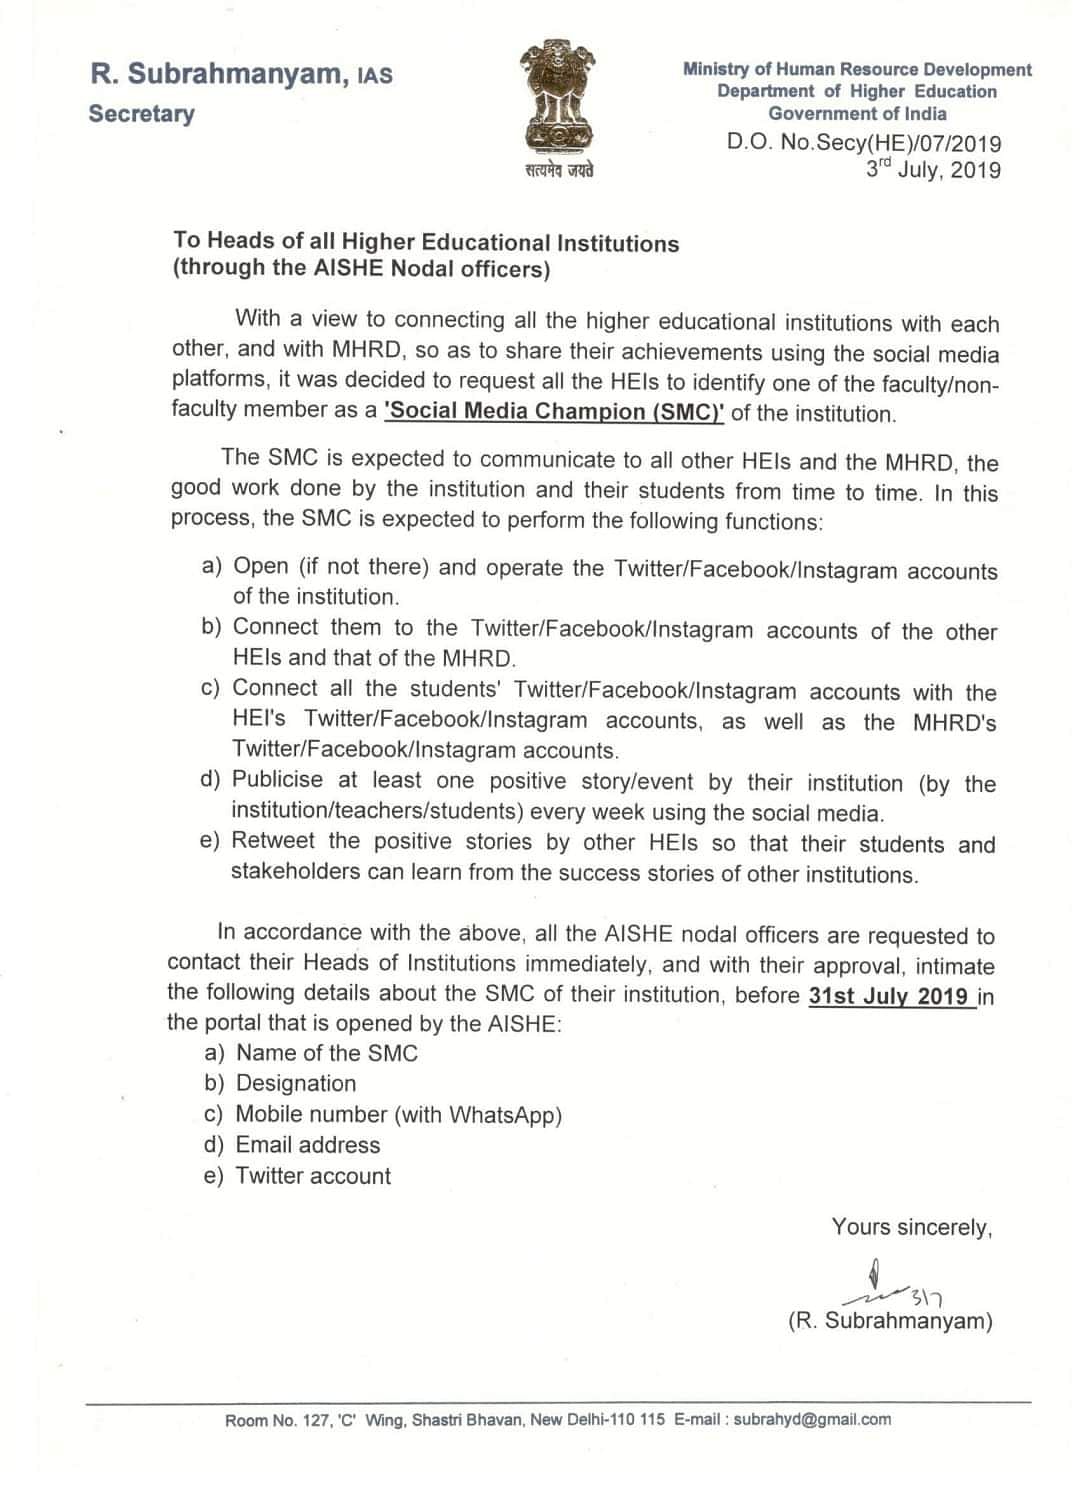 The Modi government has asked colleges to connect social media accounts of students to that of the HRD Ministry.